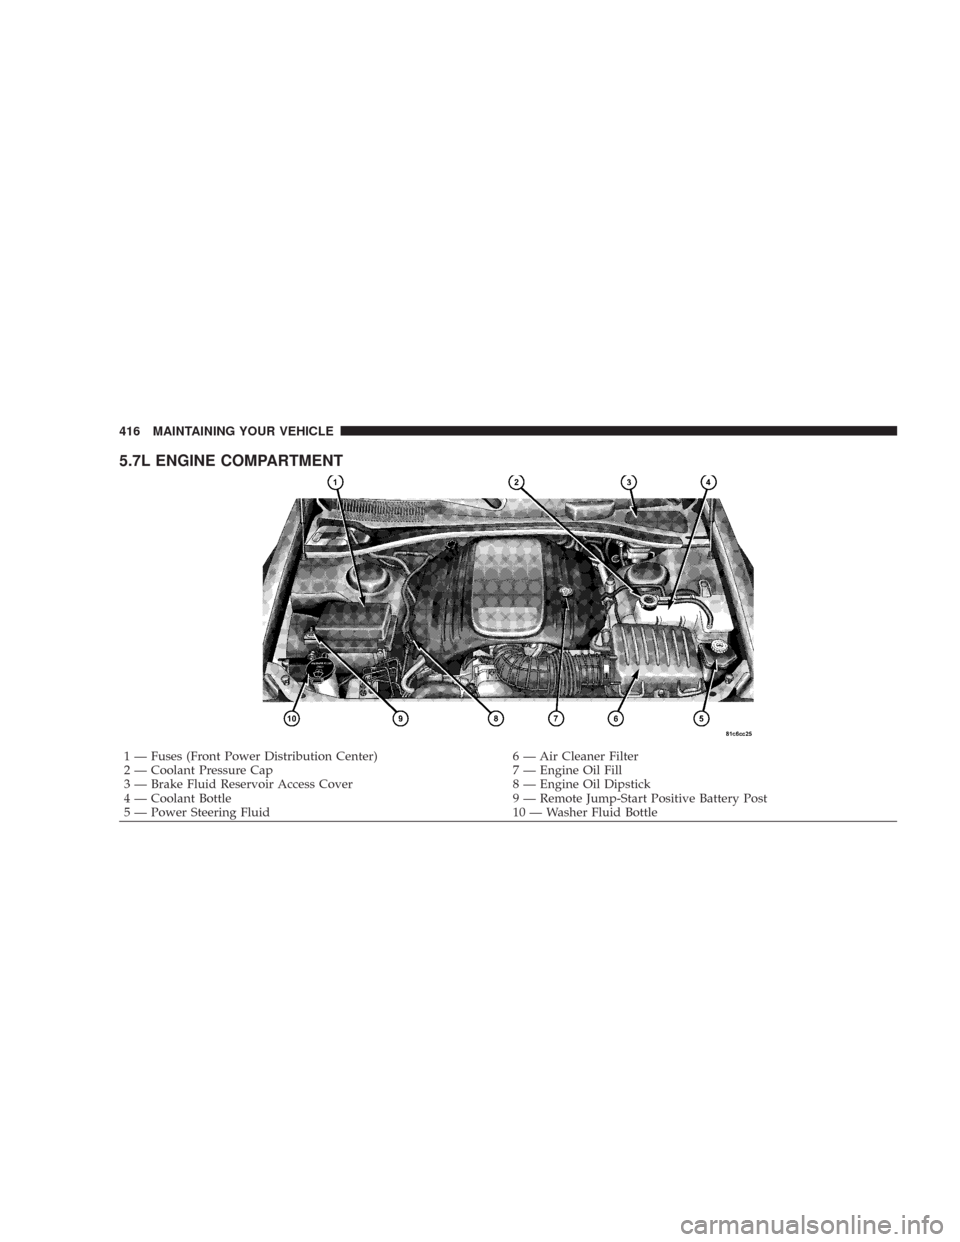 CHRYSLER 300 C 2008 1.G Owners Manual 5.7L ENGINE COMPARTMENT
1 — Fuses (Front Power Distribution Center) 6 — Air Cleaner Filter
2 — Coolant Pressure Cap 7 — Engine Oil Fill
3 — Brake Fluid Reservoir Access Cover 8 — Engine Oi